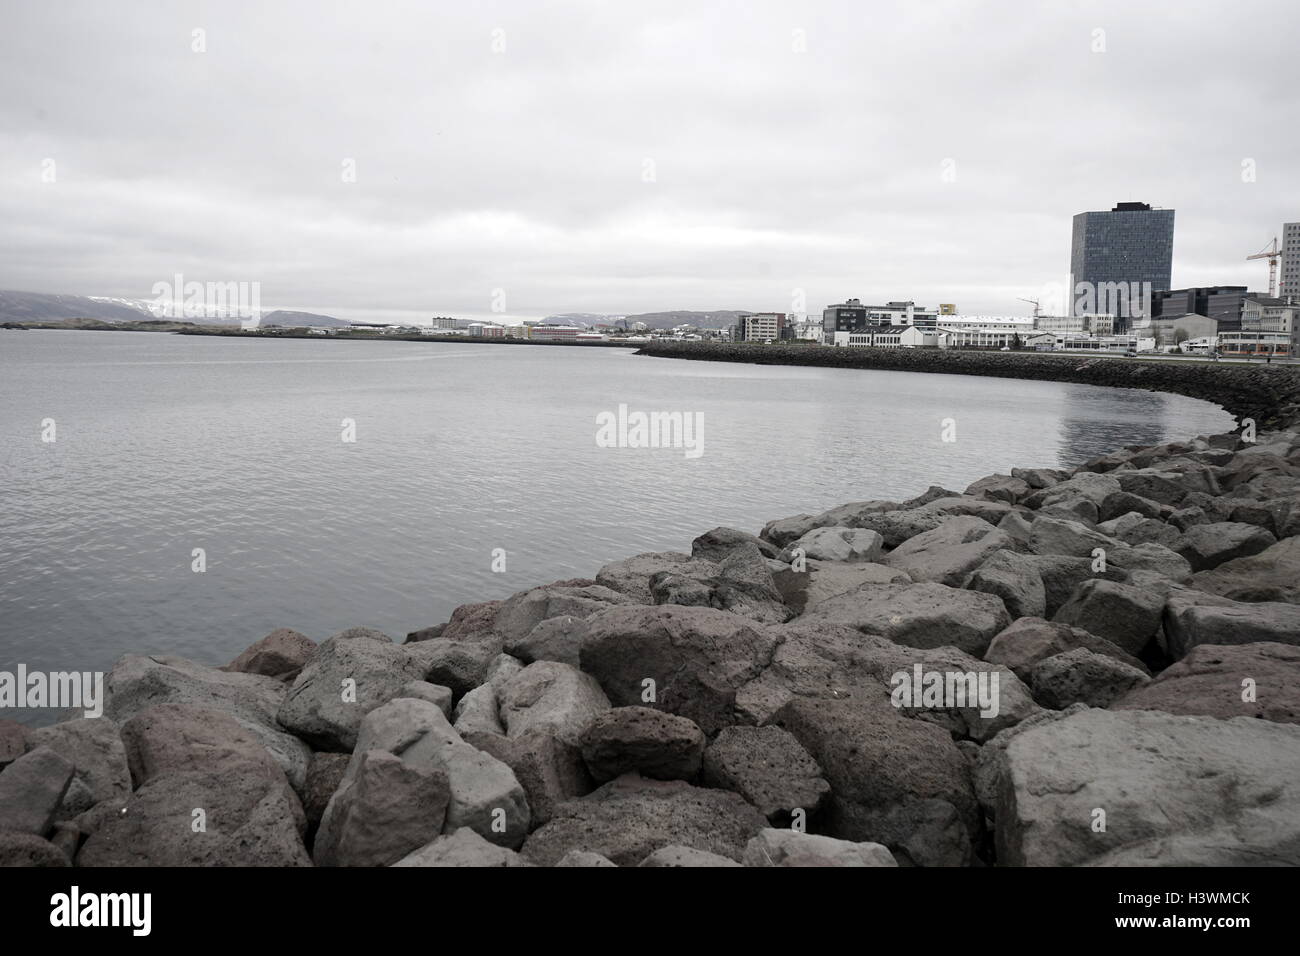 Stone breaker barrage along the shores of Reykjavik Harbour, Iceland. Dated 21st Century Stock Photo